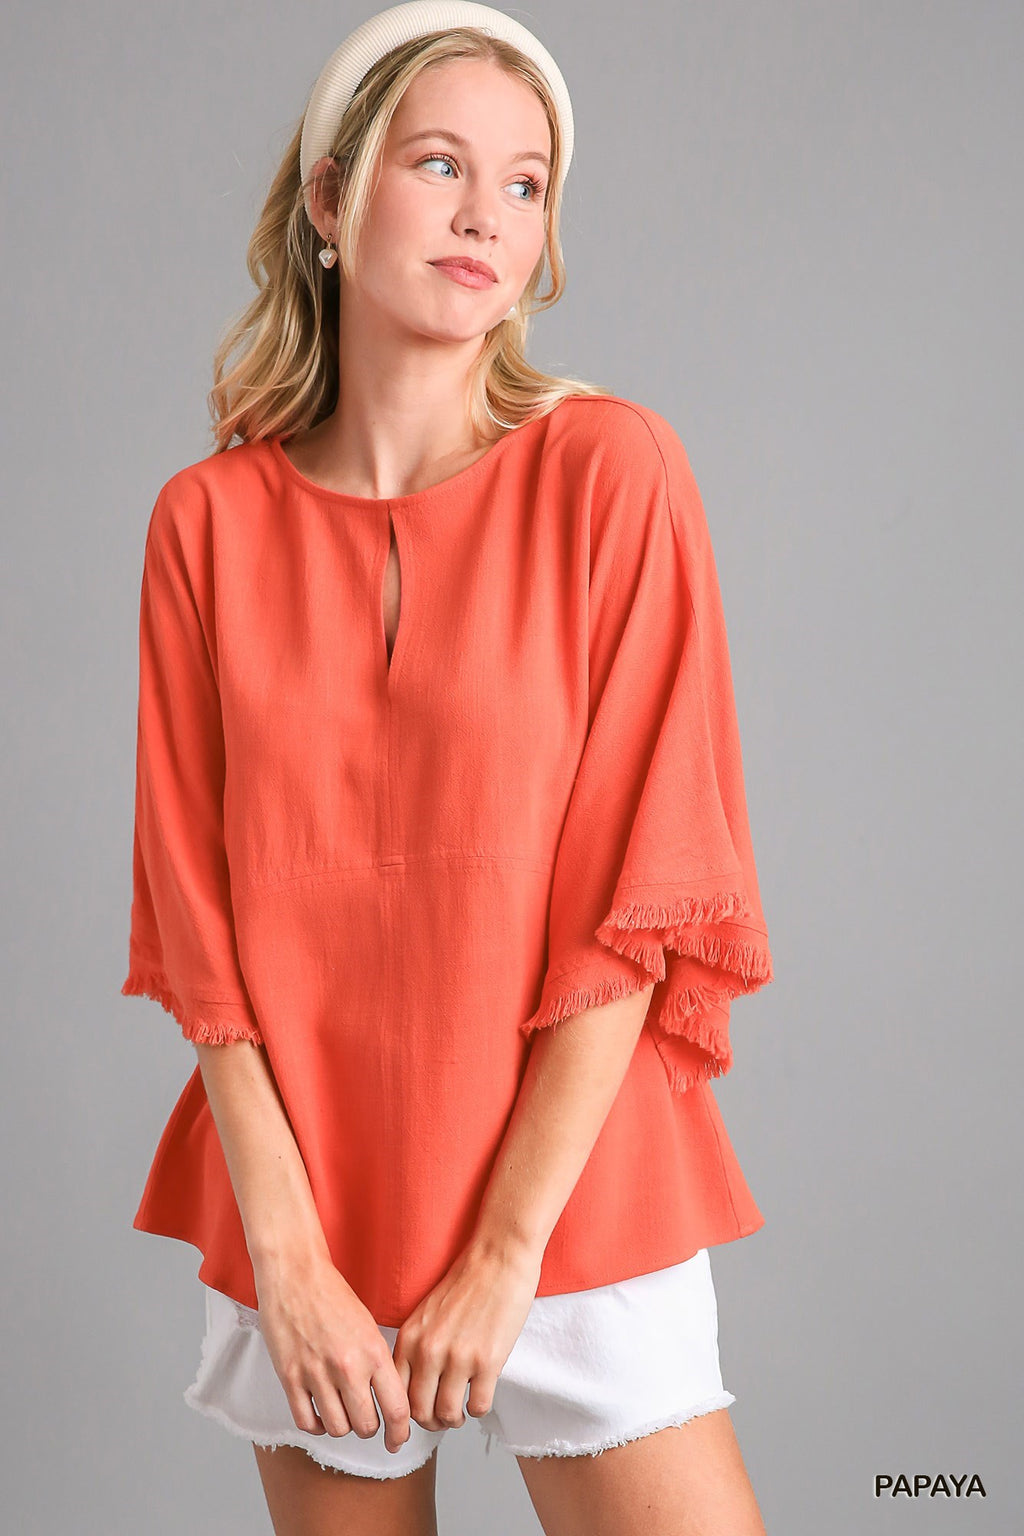 Papaya Umgee Linen Blend Top with Cut out Round Neck, 3/4 Quarter Sleeves and Frayed Edge Hem